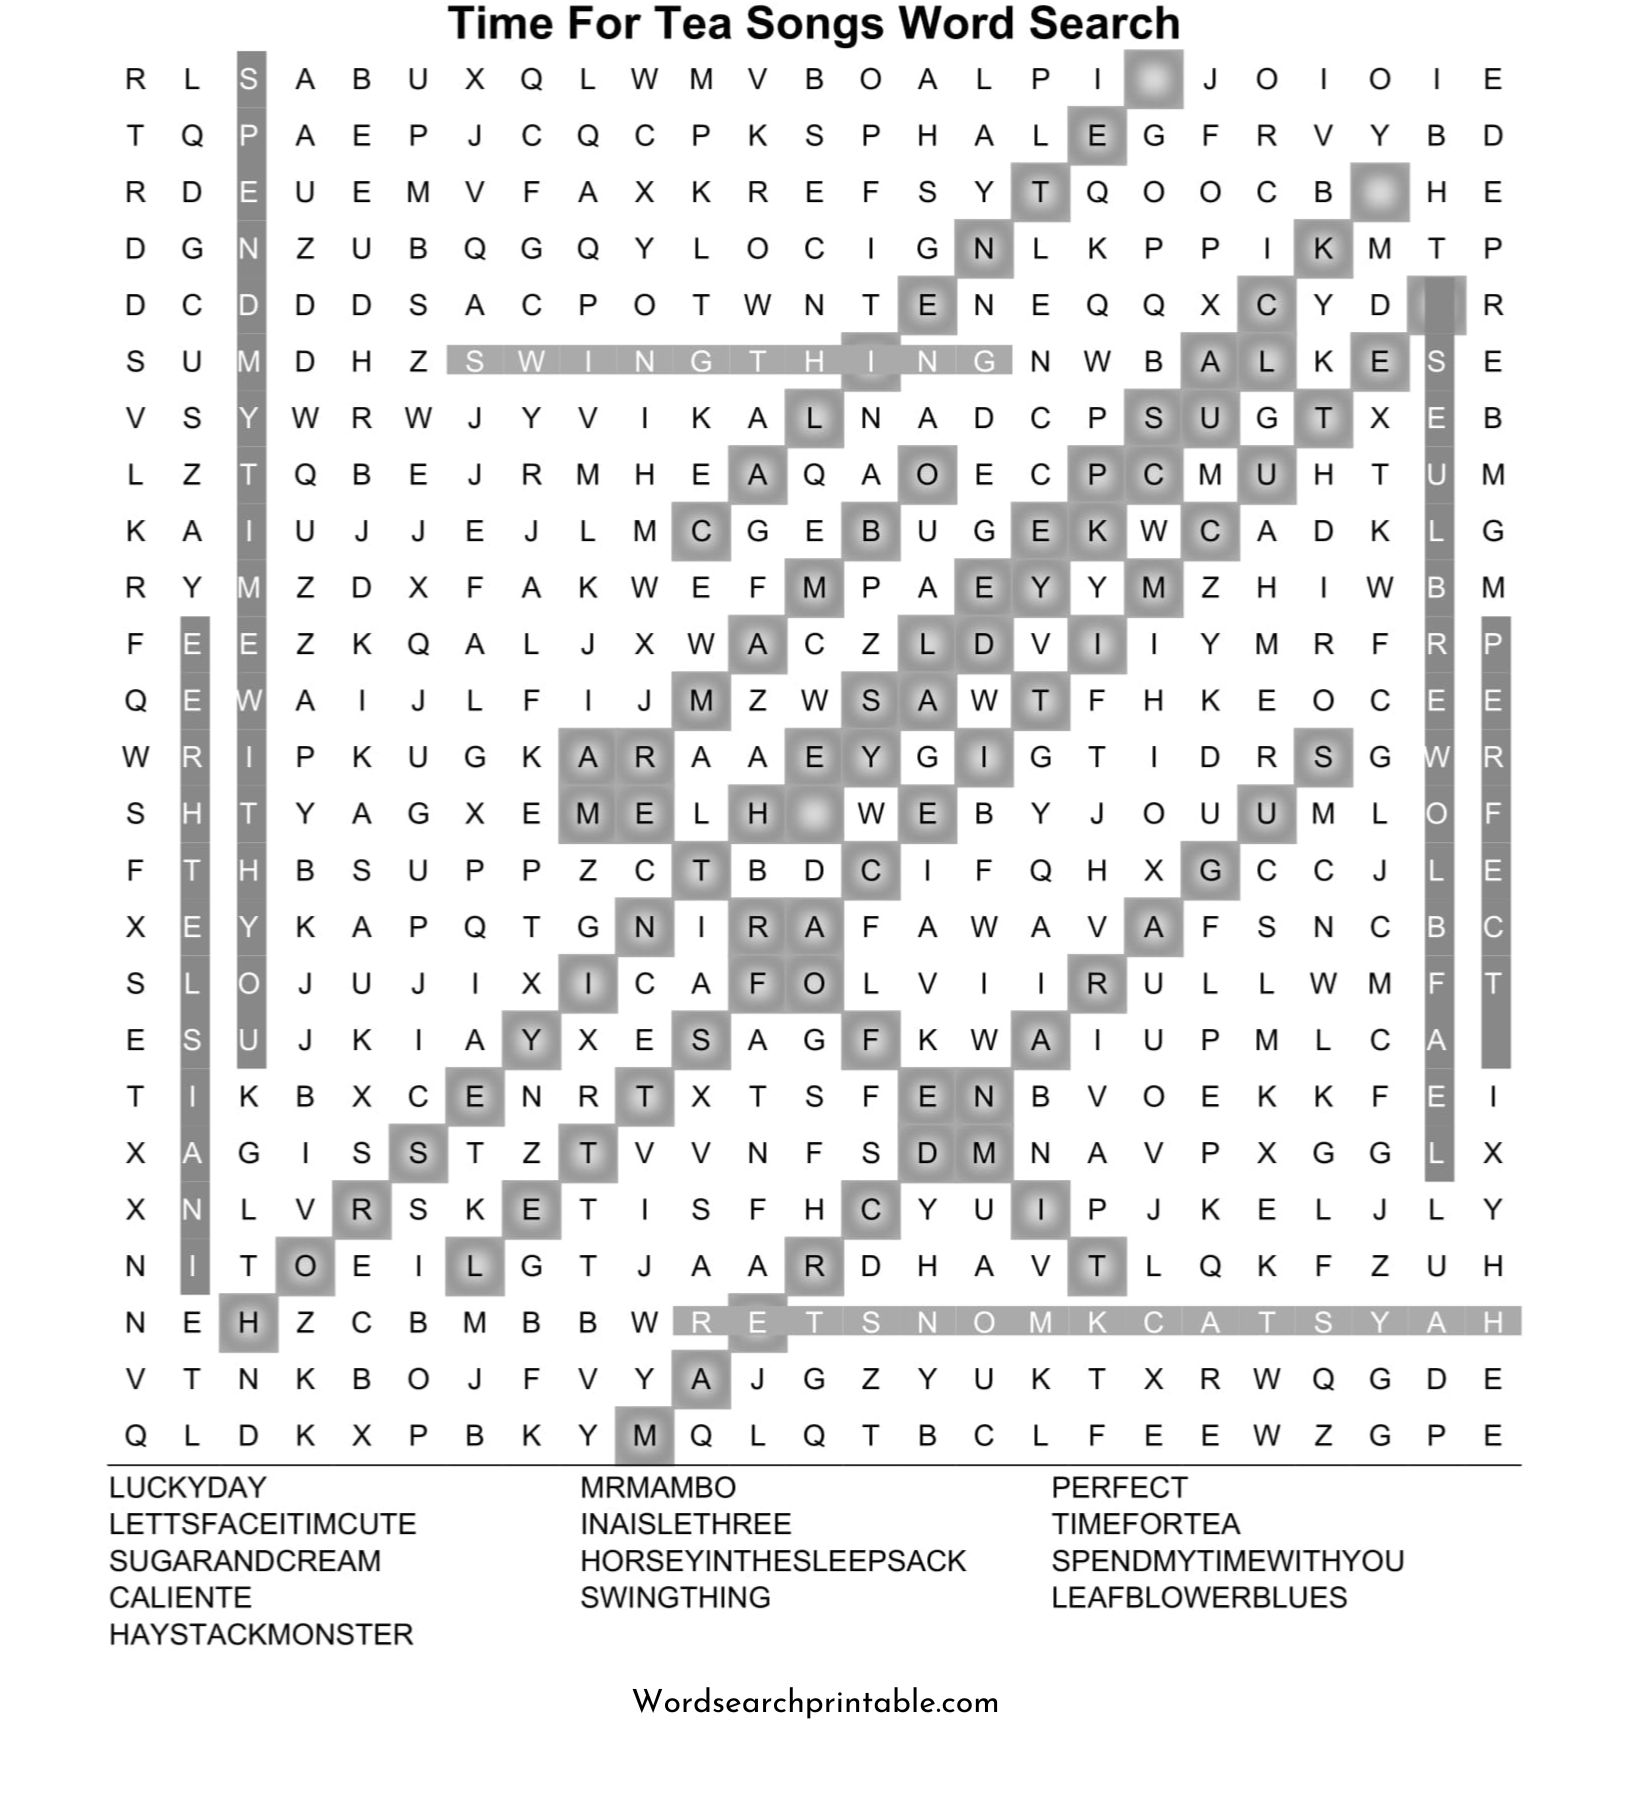 time for tea songs word search puzzle solution